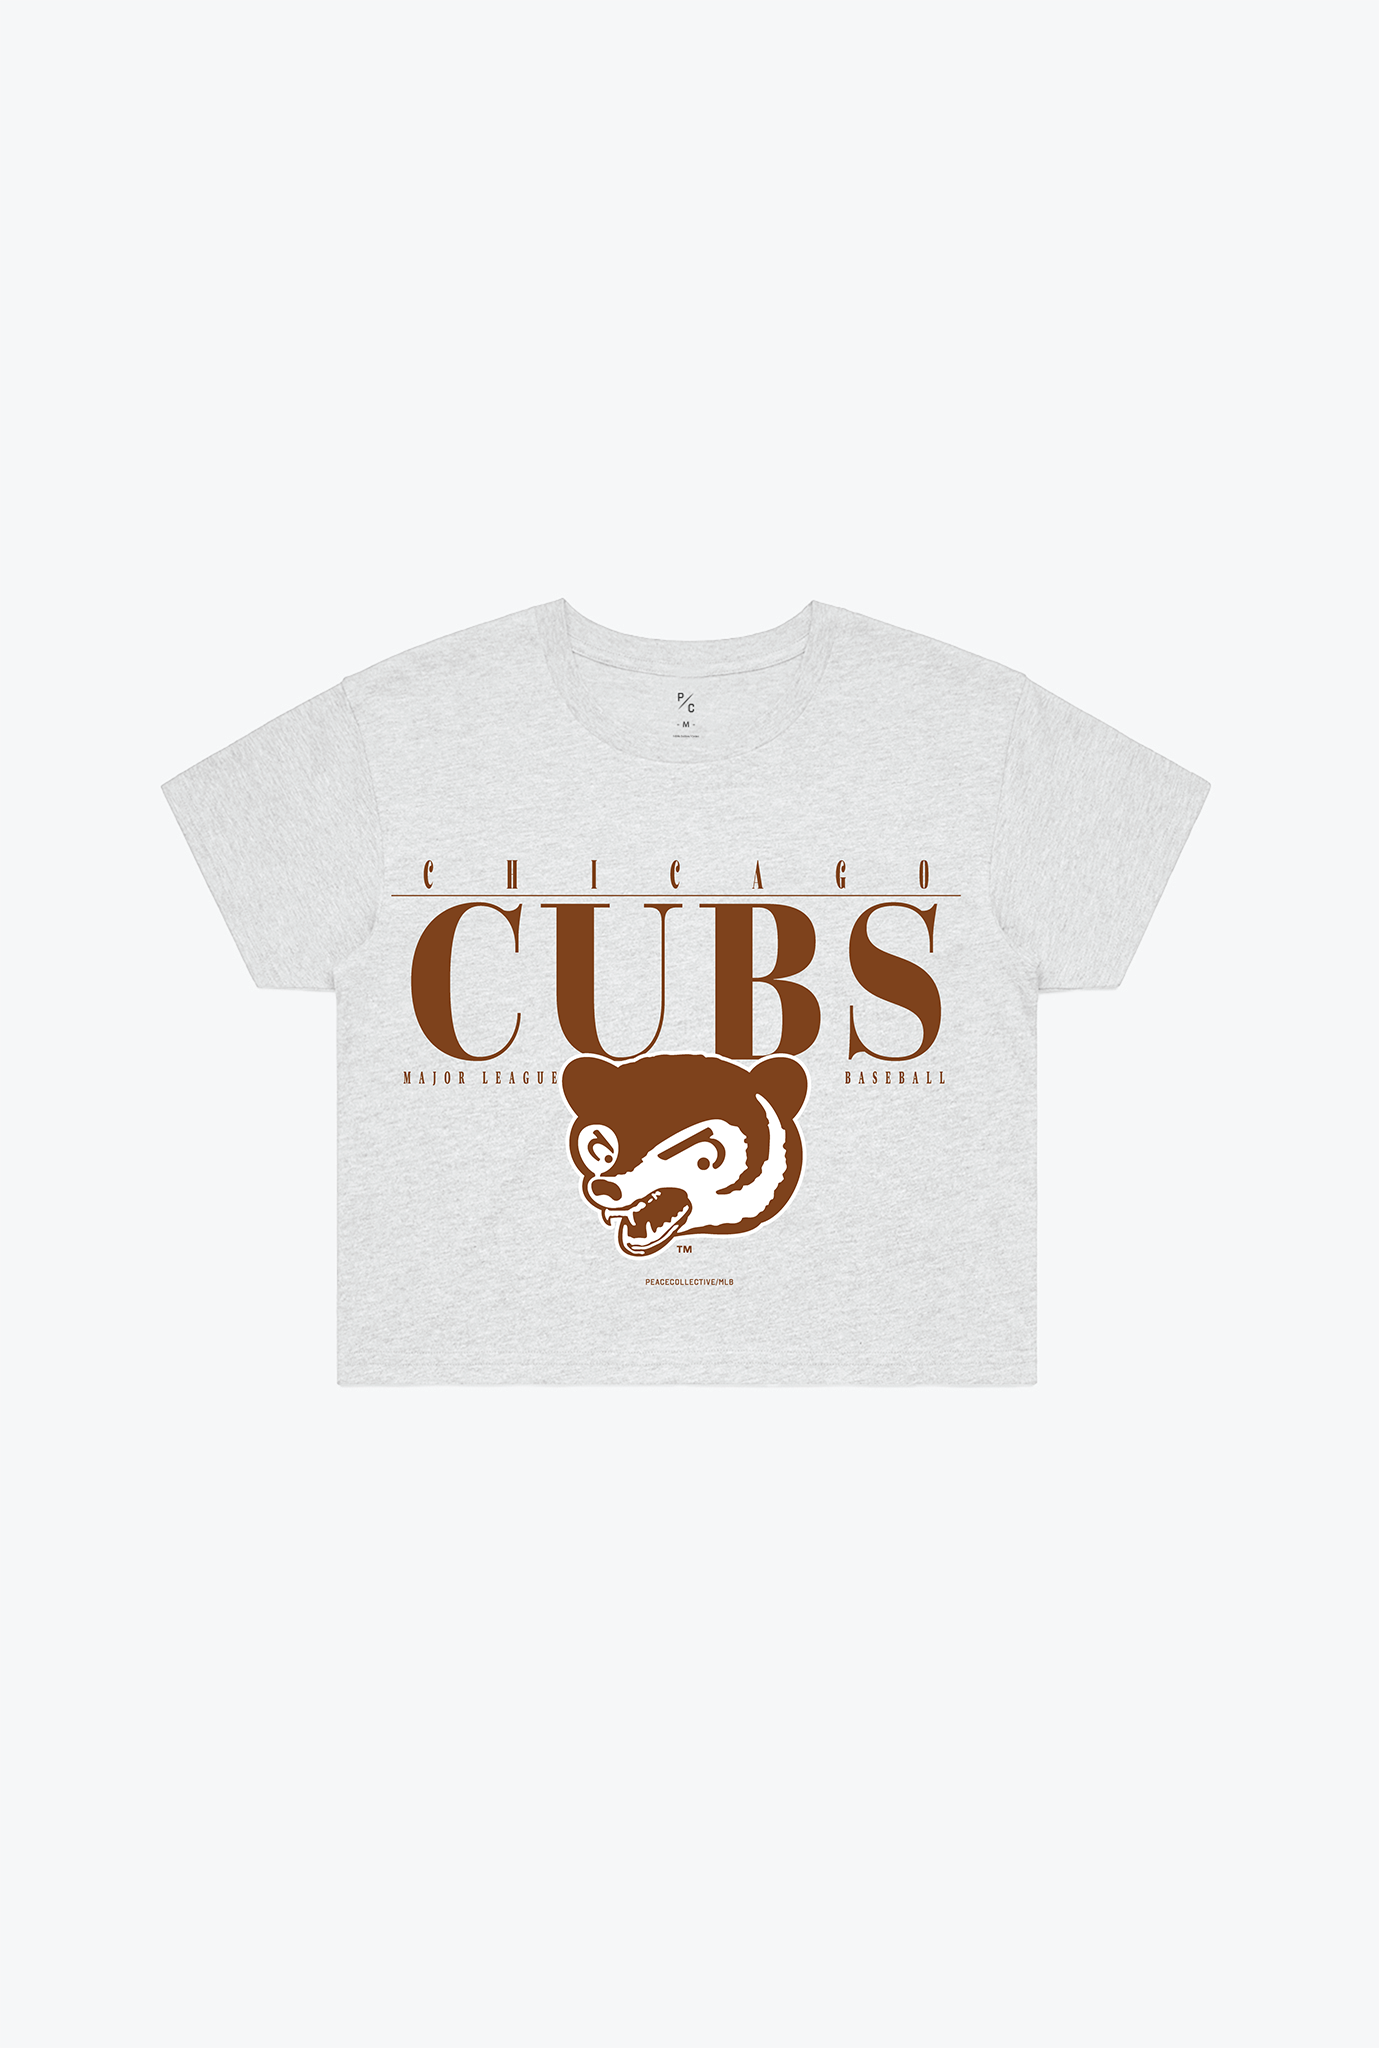 Chicago Cubs Throwback Cropped T-Shirt - Ash